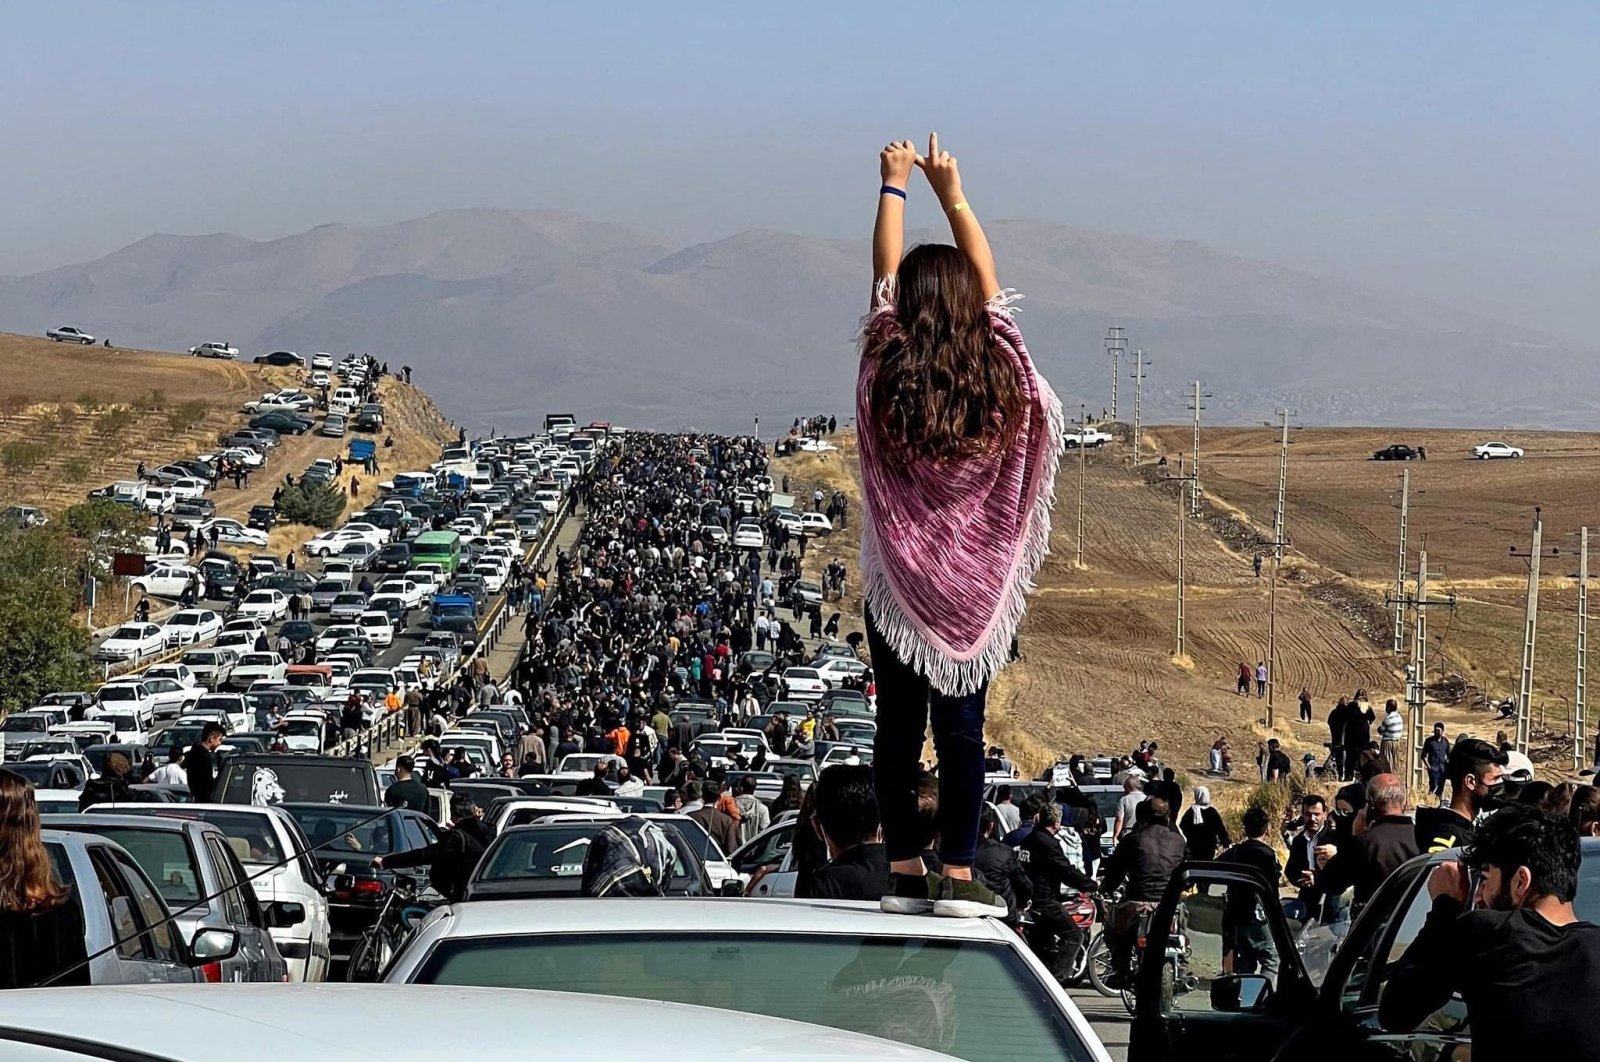 A woman stands on top of a vehicle as thousands make their way toward the grave of Mahsa Amini, Saqez, Iran, Oct. 26, 2022. (AFP Photo)